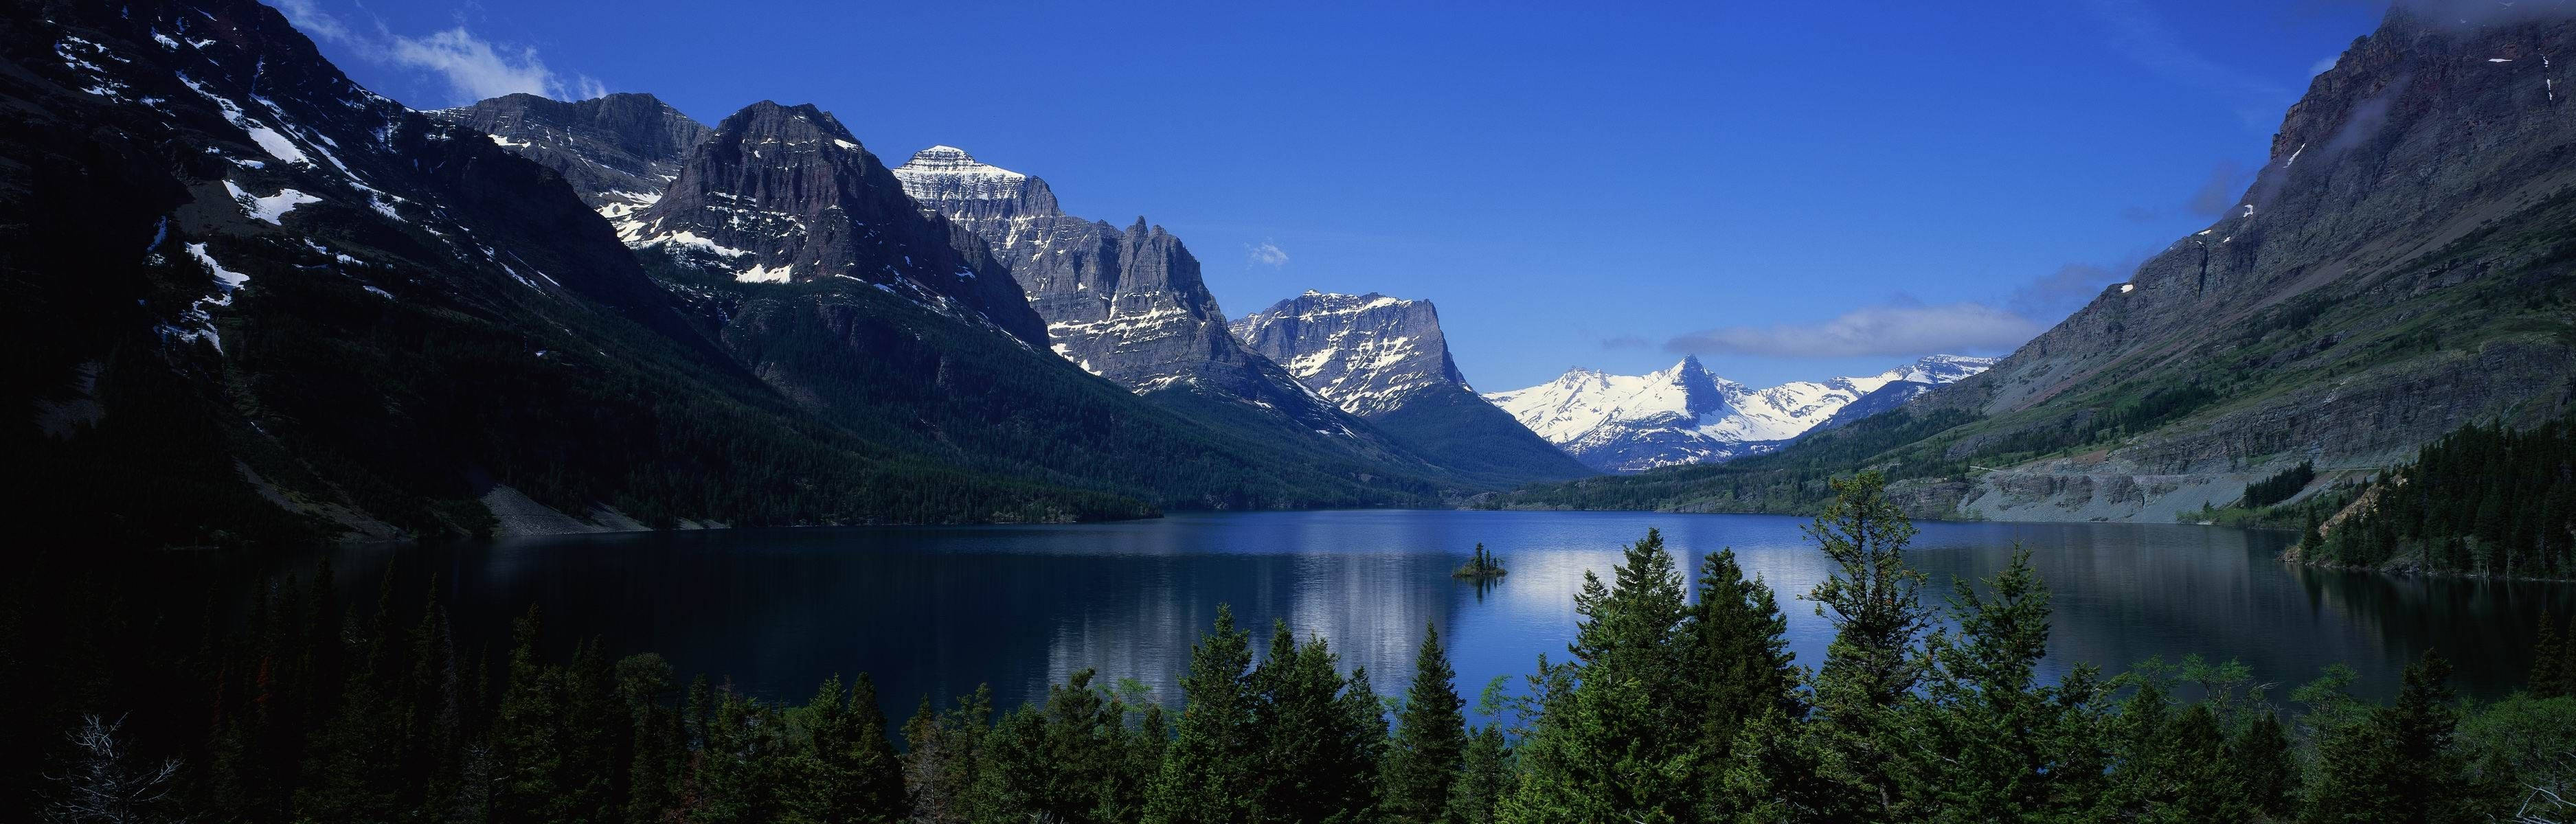 Saint Mary Lake In Glacier National Park For Monitor Wallpaper